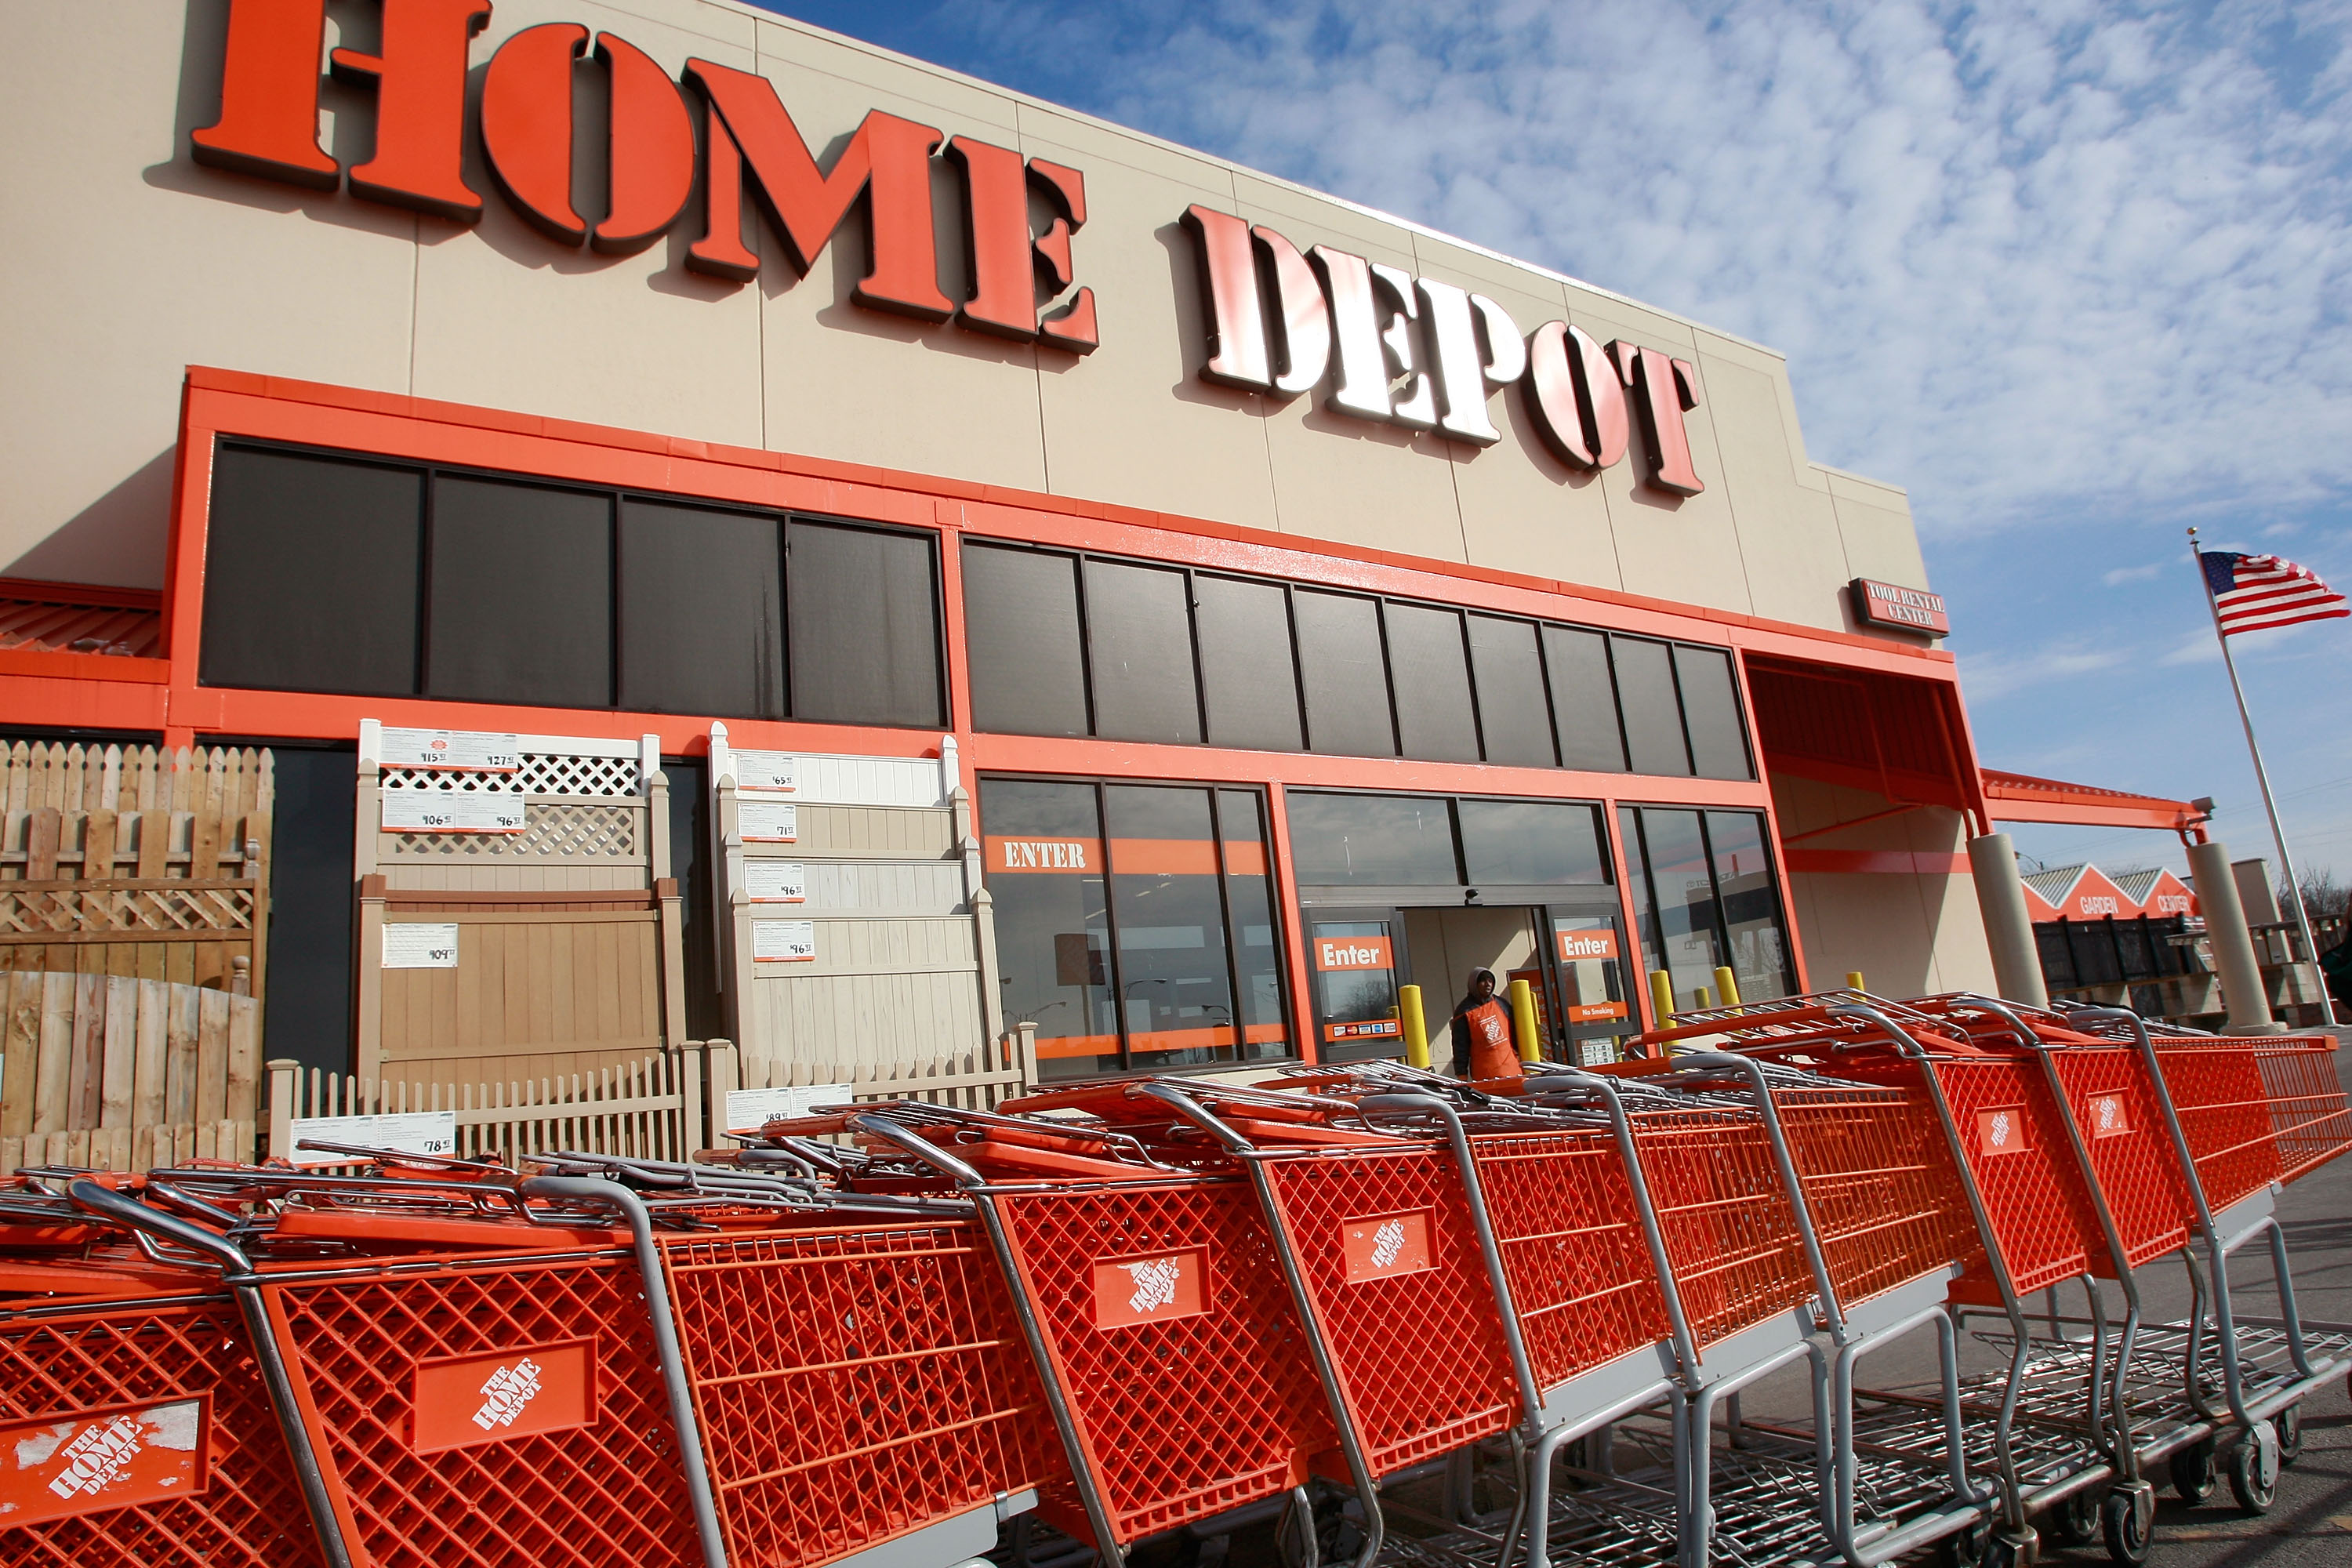 COVID-19: Home Depot Limits Number Of Customers In Stores, Increases